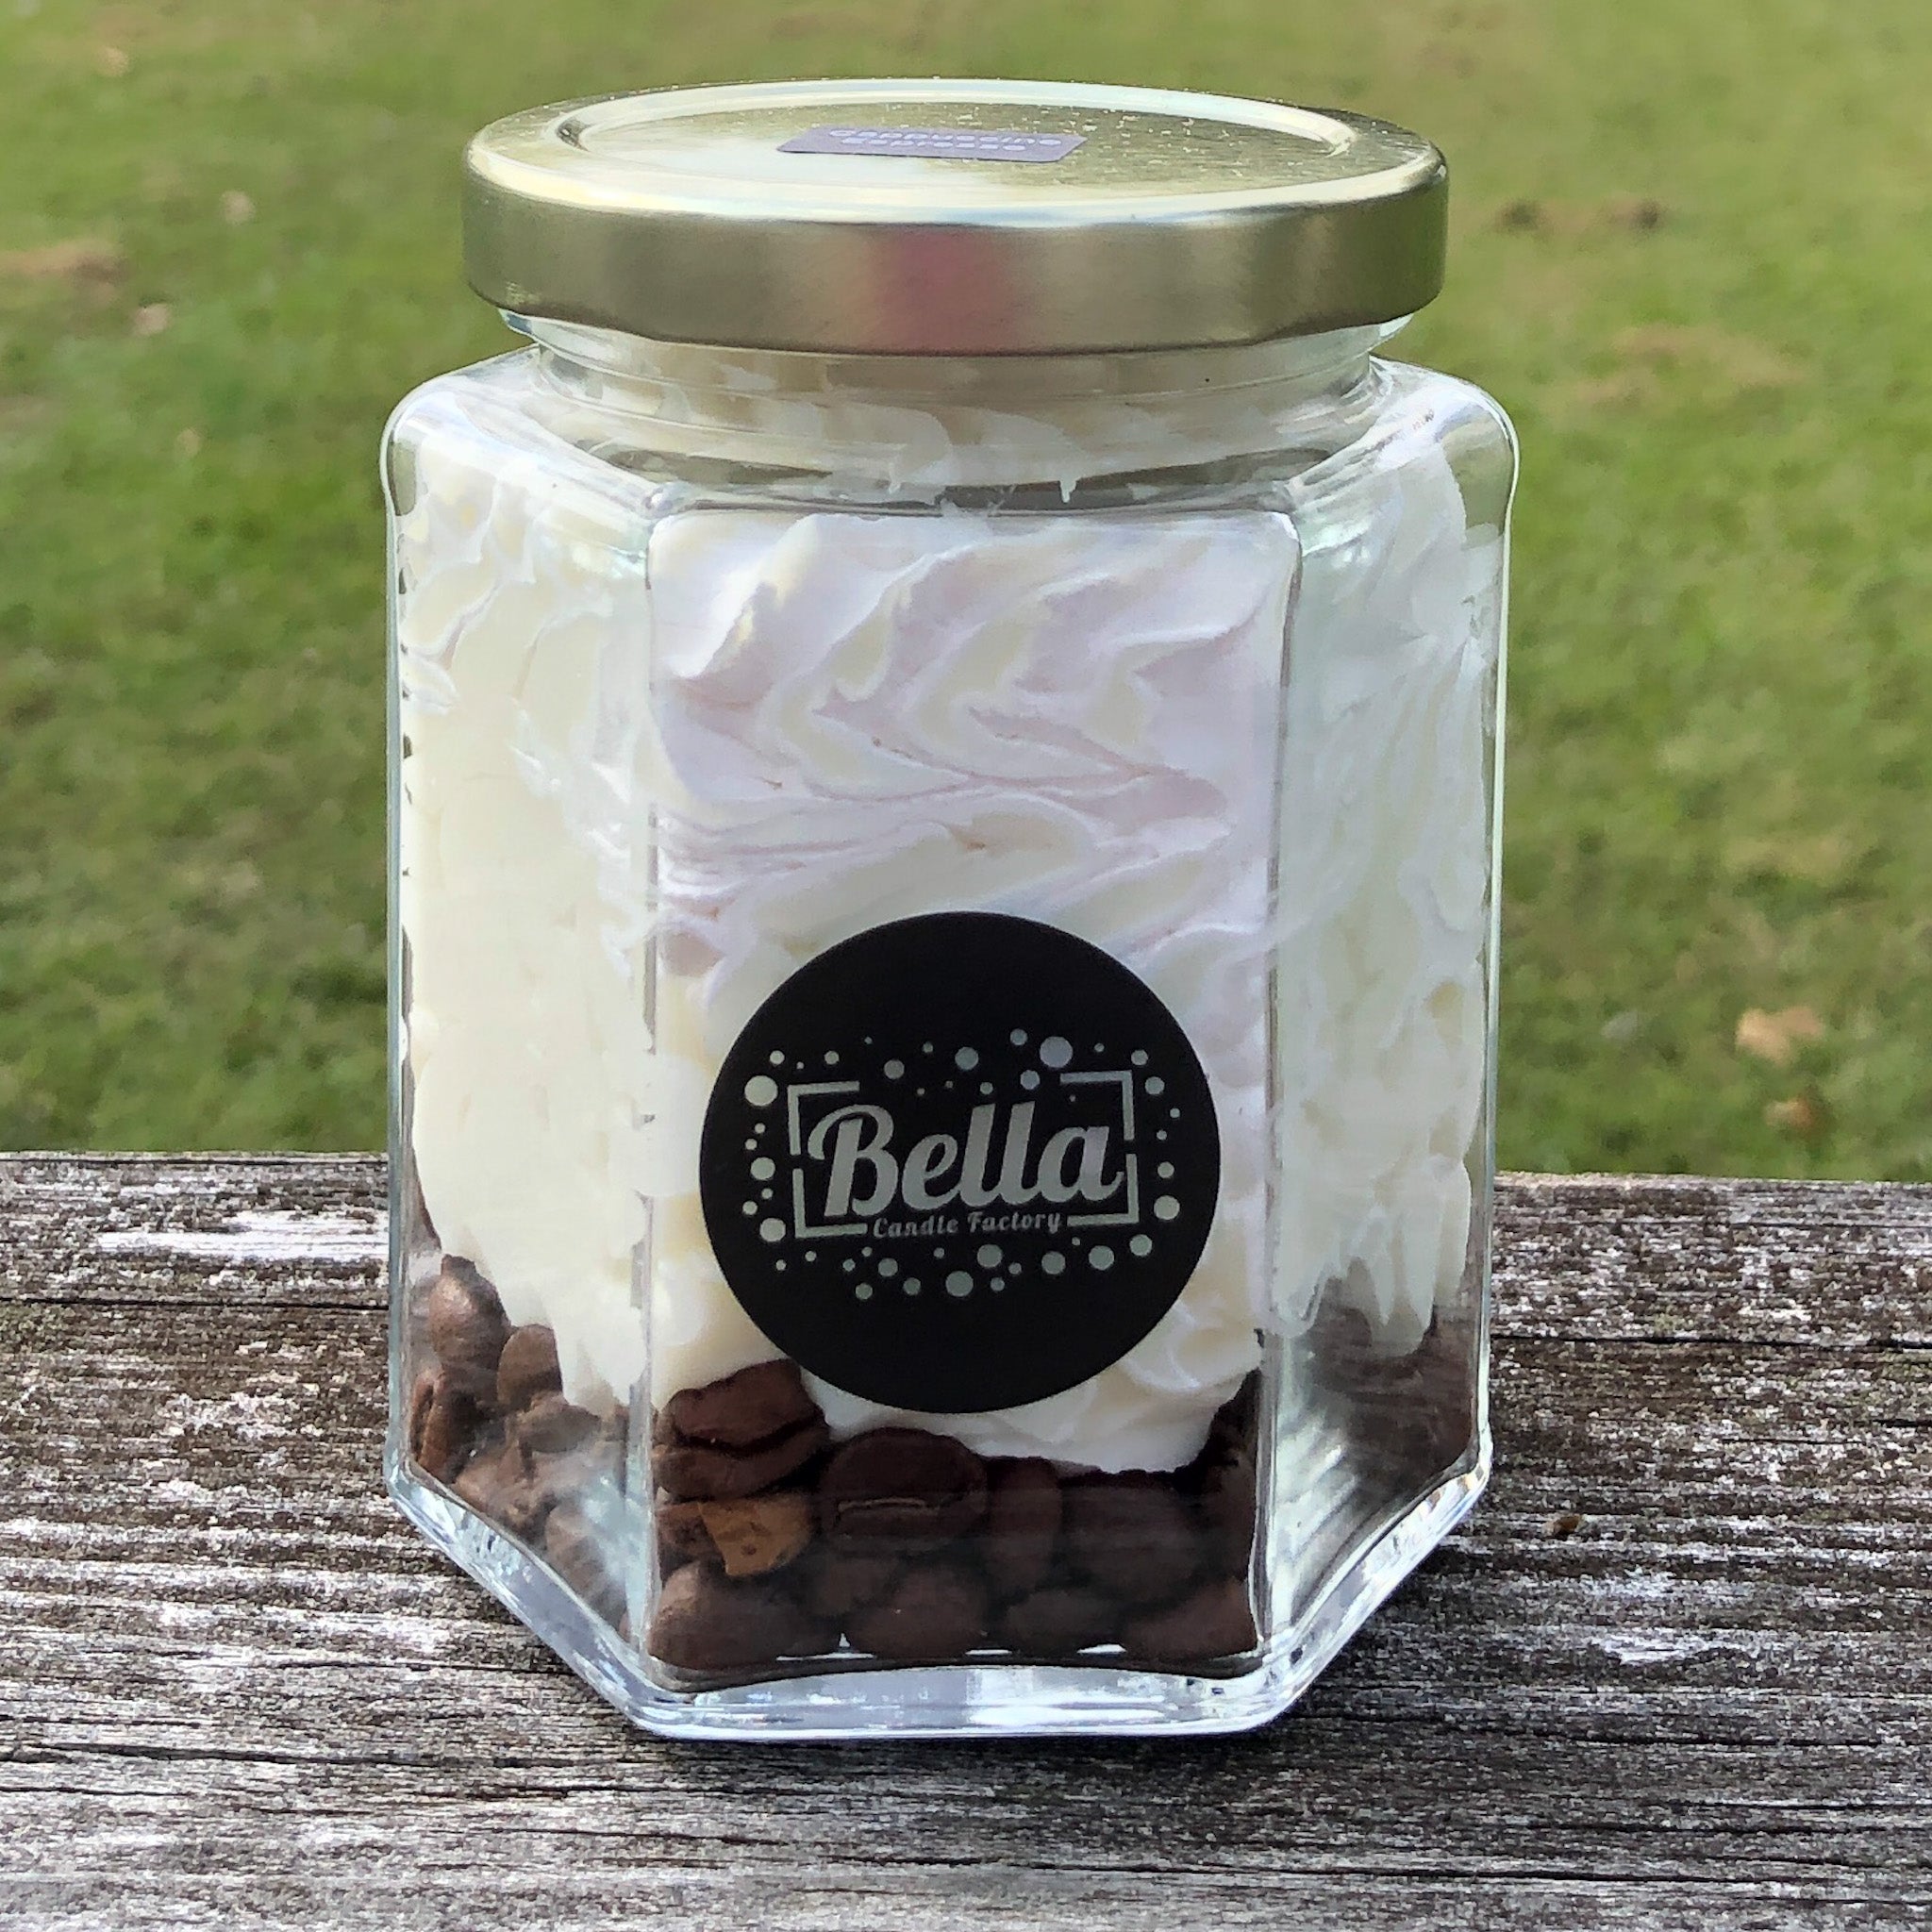 Bella Candle Factory Coffee Dolce: Cappuccino Espresso Scented Dessert Jar Candle